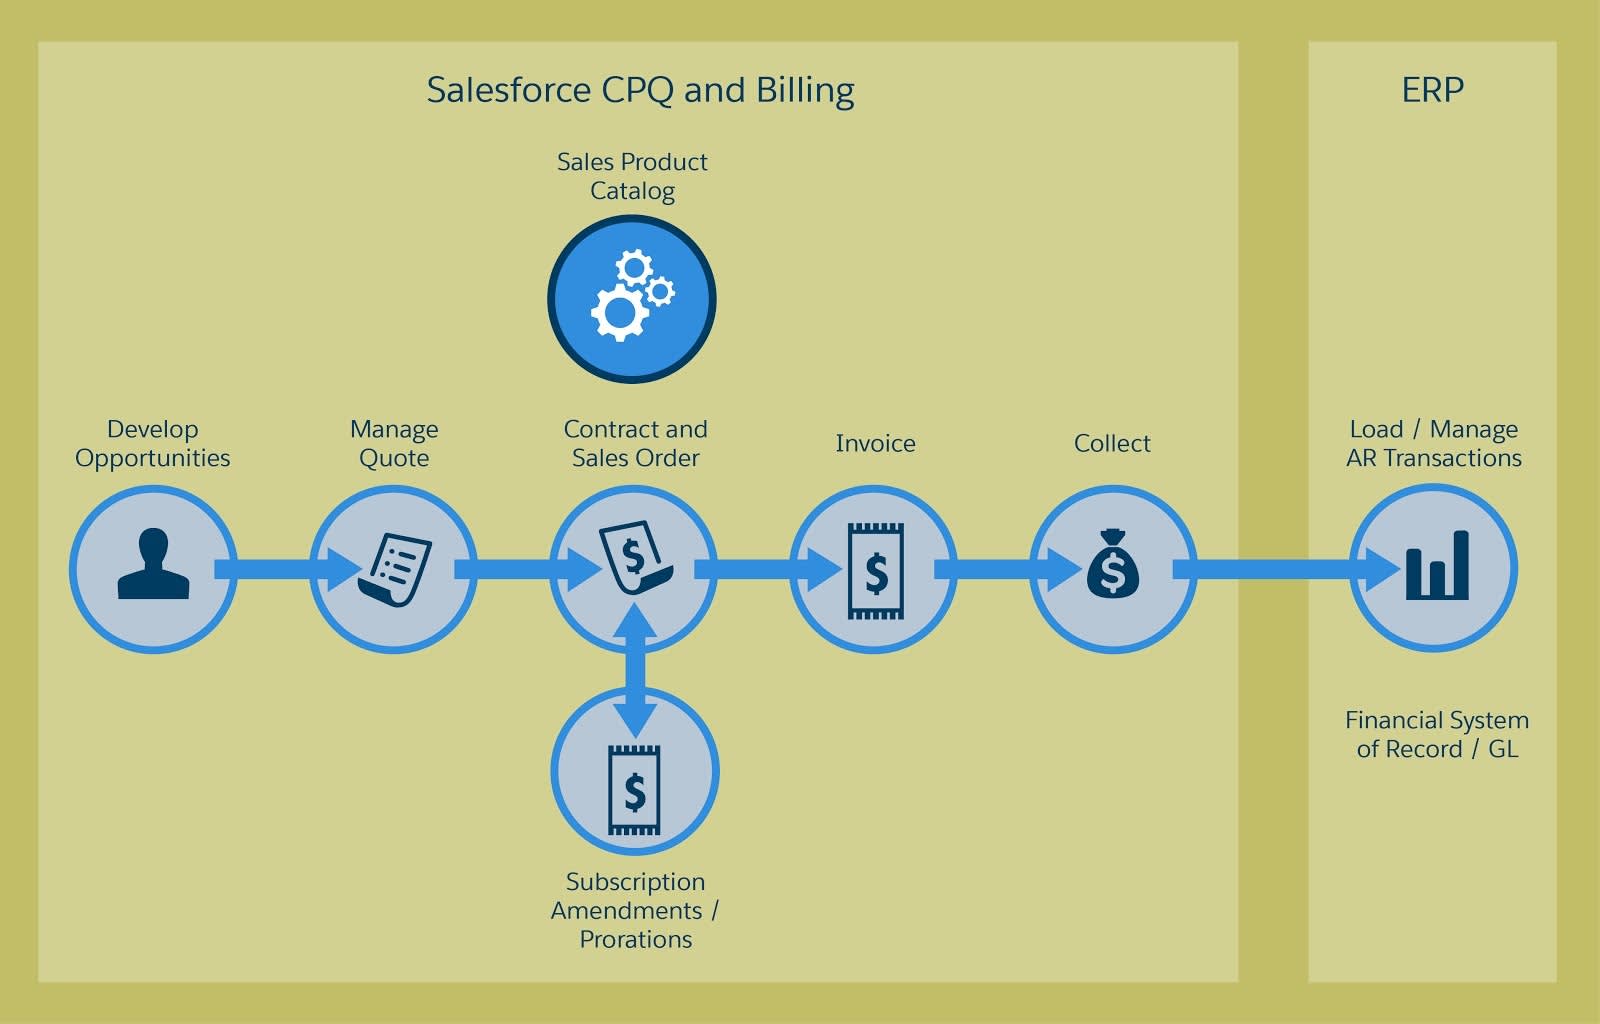 Salesforce CPQ and Salesforce Billing offer a unified experience on one platform.